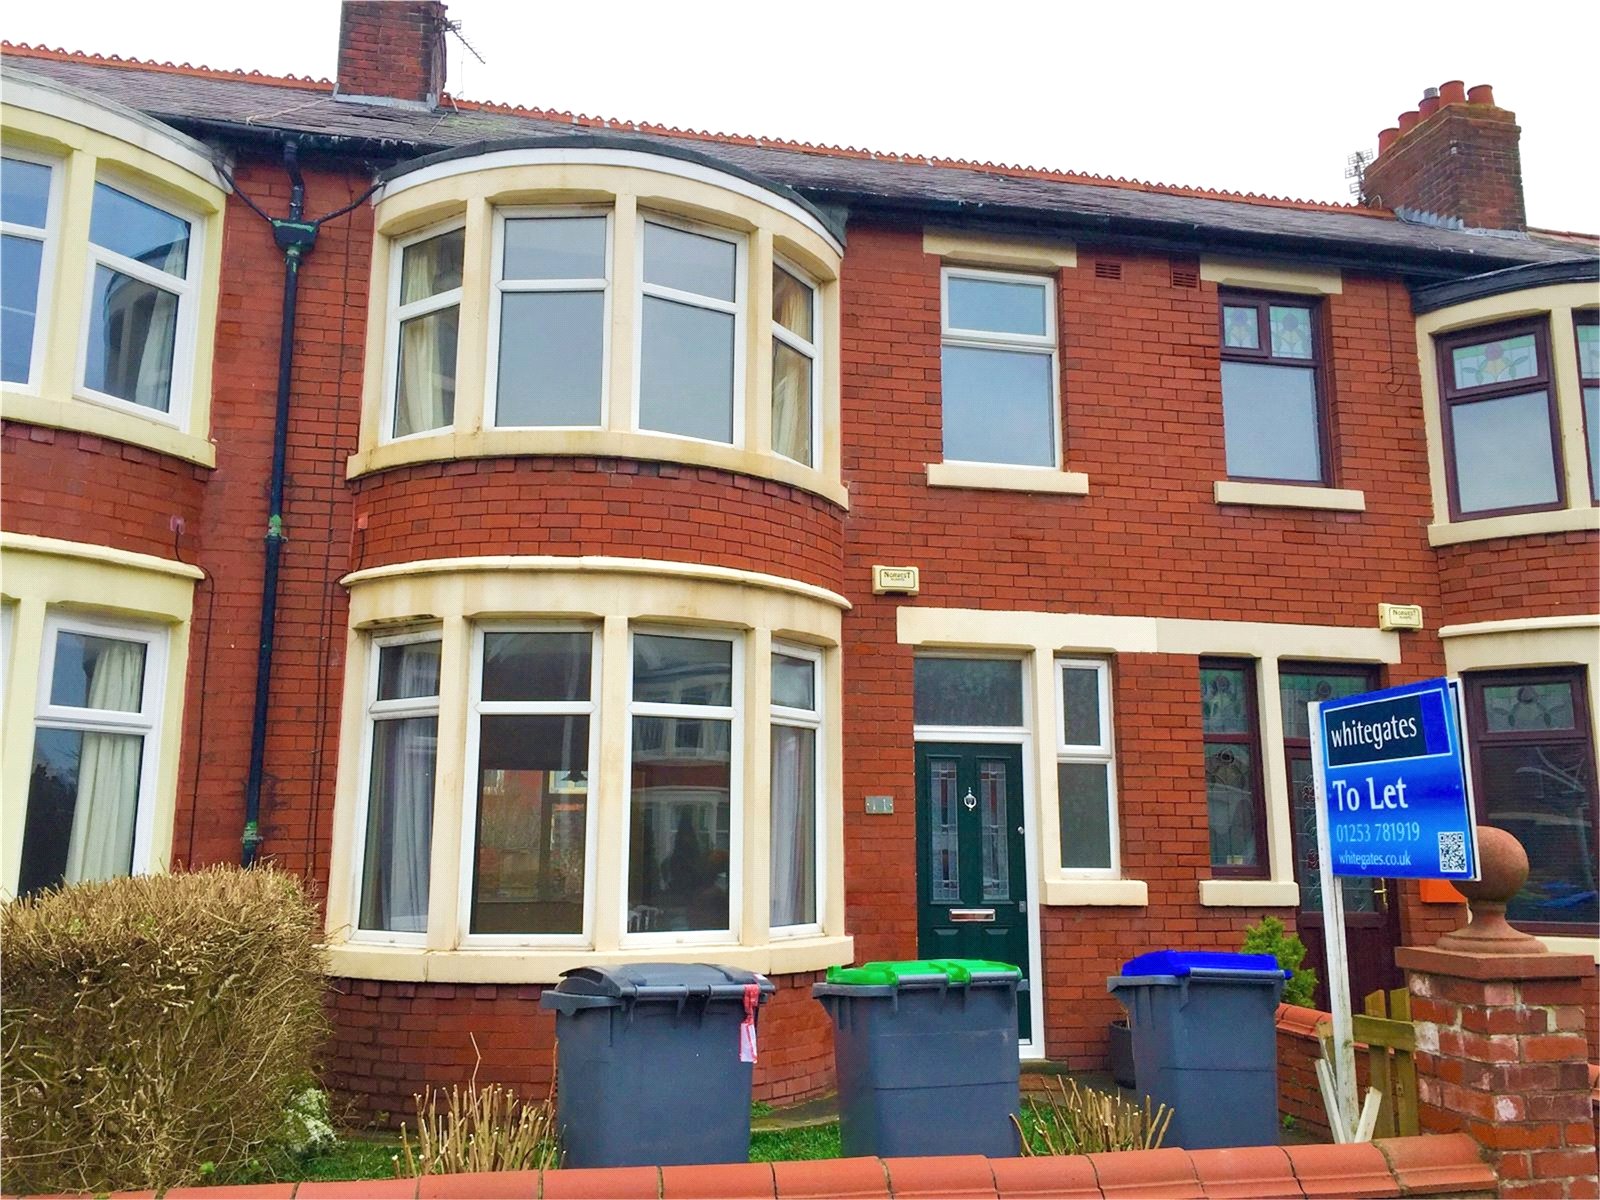 Whitegates St Annes 3 Bedroom House To Rent In Westwood